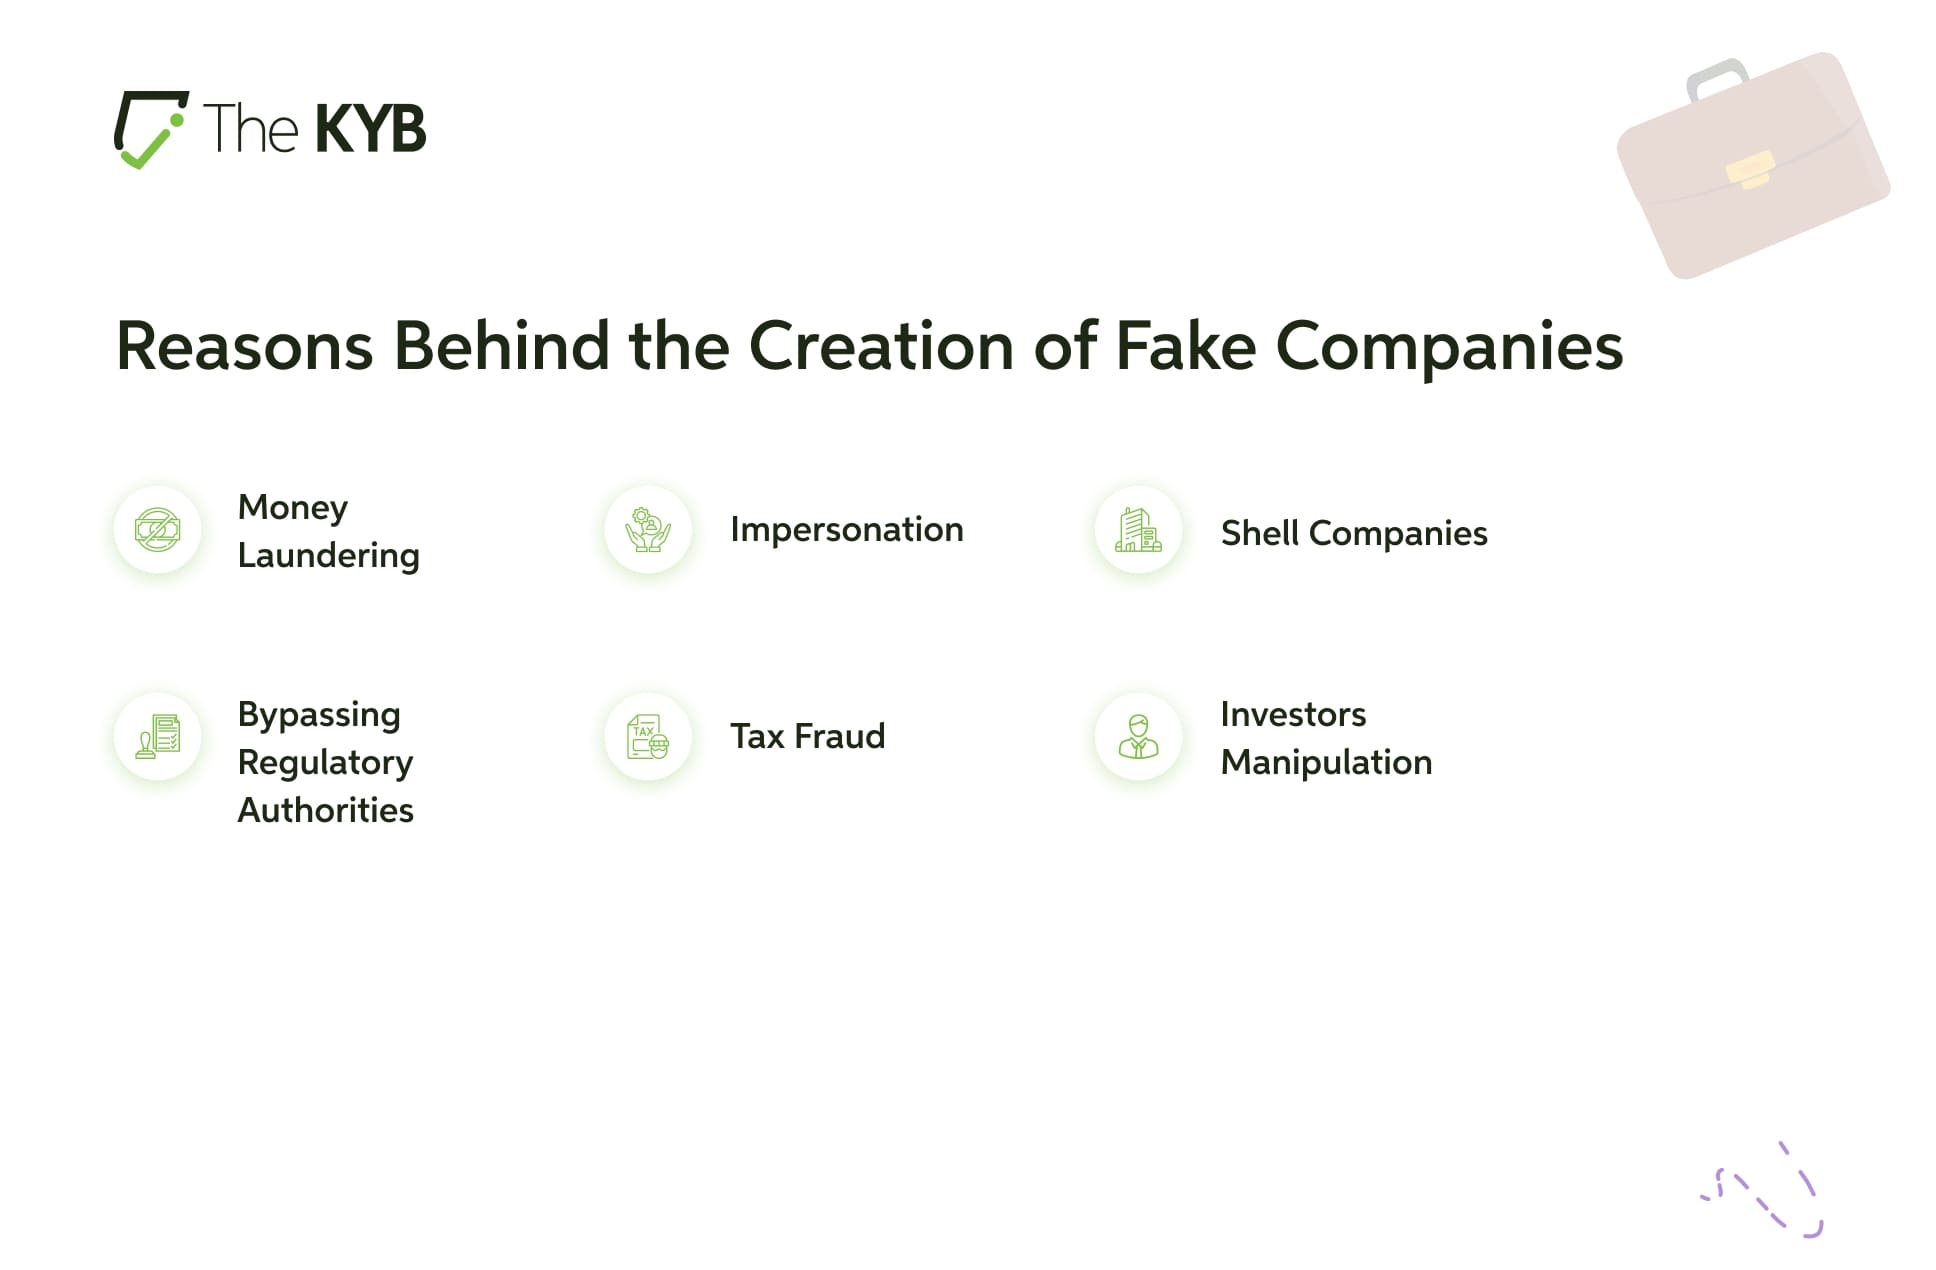 Reasons for emergence of fake companies